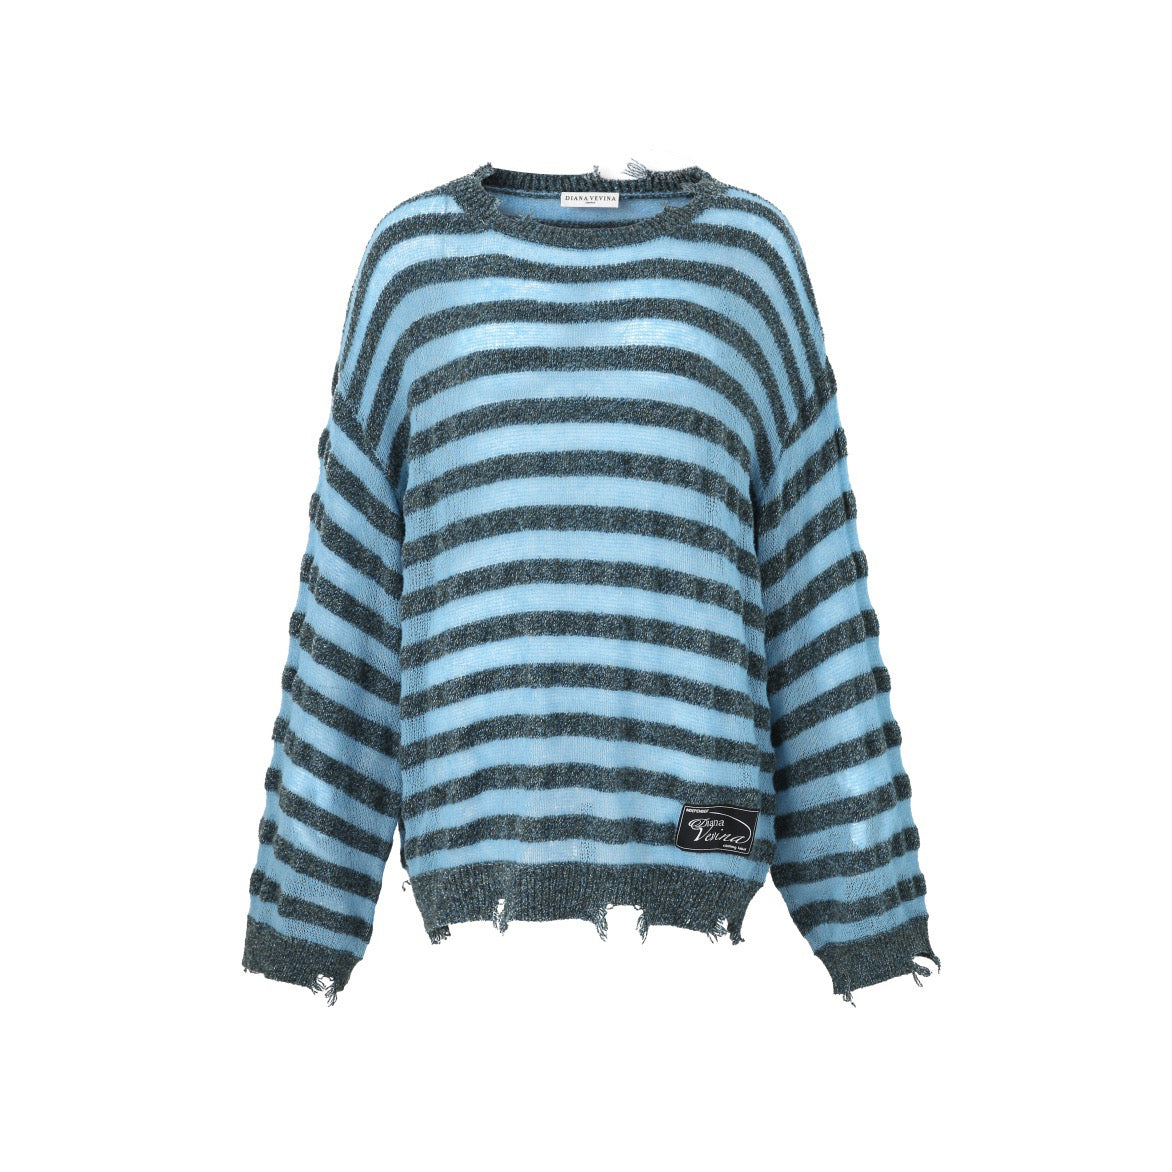 DIANA VEVINA Silhouette Colorful Stripe Destroyed Sweater Blue